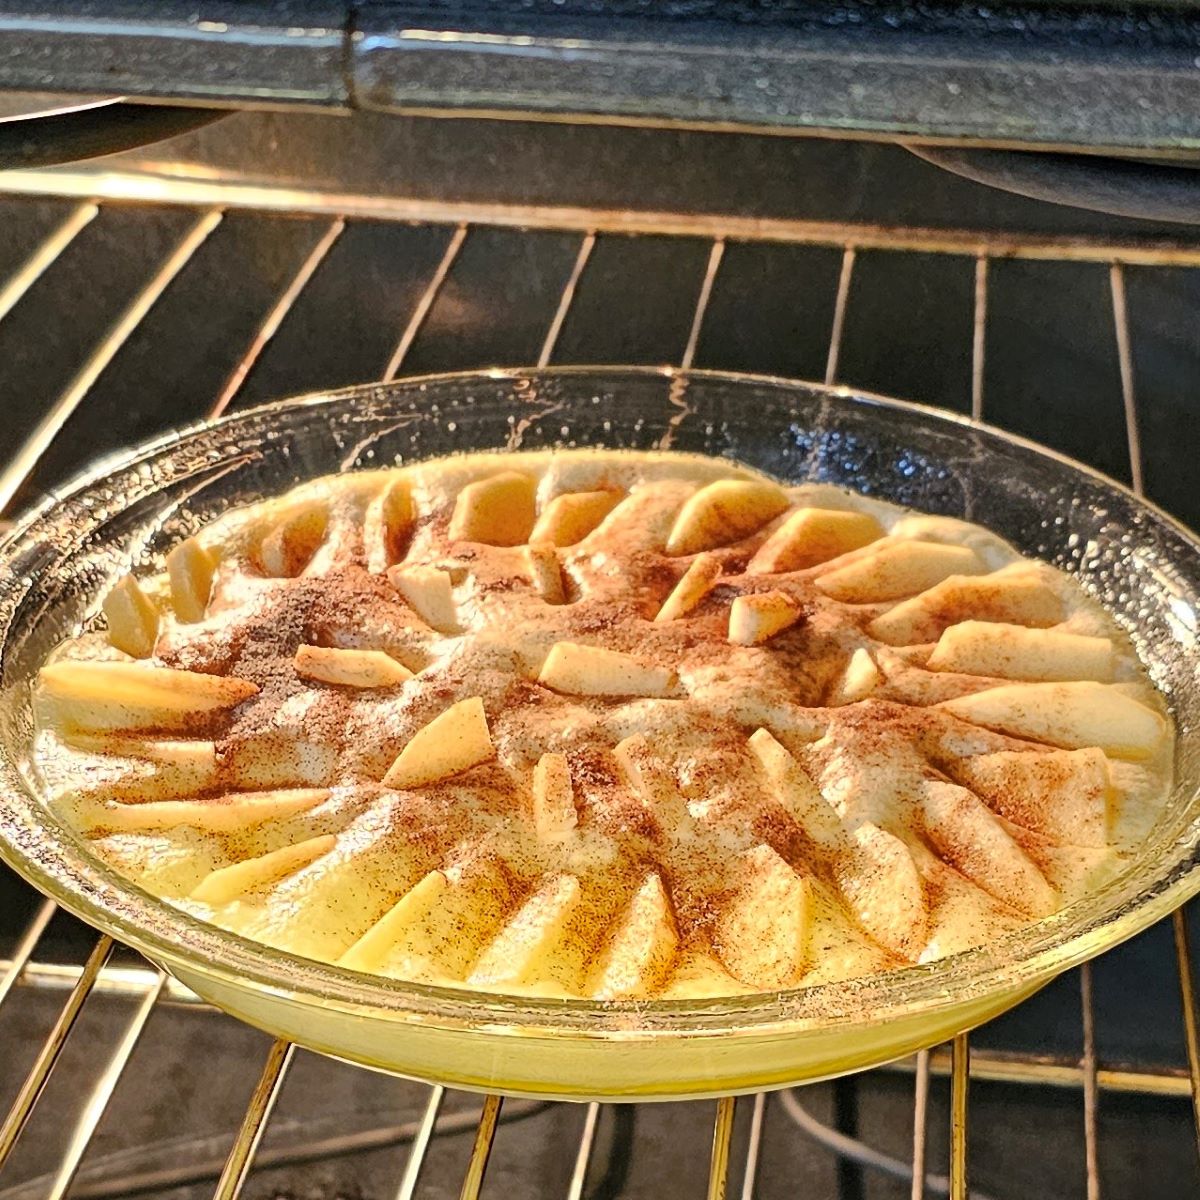 German pancakes  baking in oven in a round glass pie dish at 375 degrees Fahrenheit for 18 to 20 minutes.  Alternate dishes to bake in include a cast iron skillet or other oven safe baking dish.